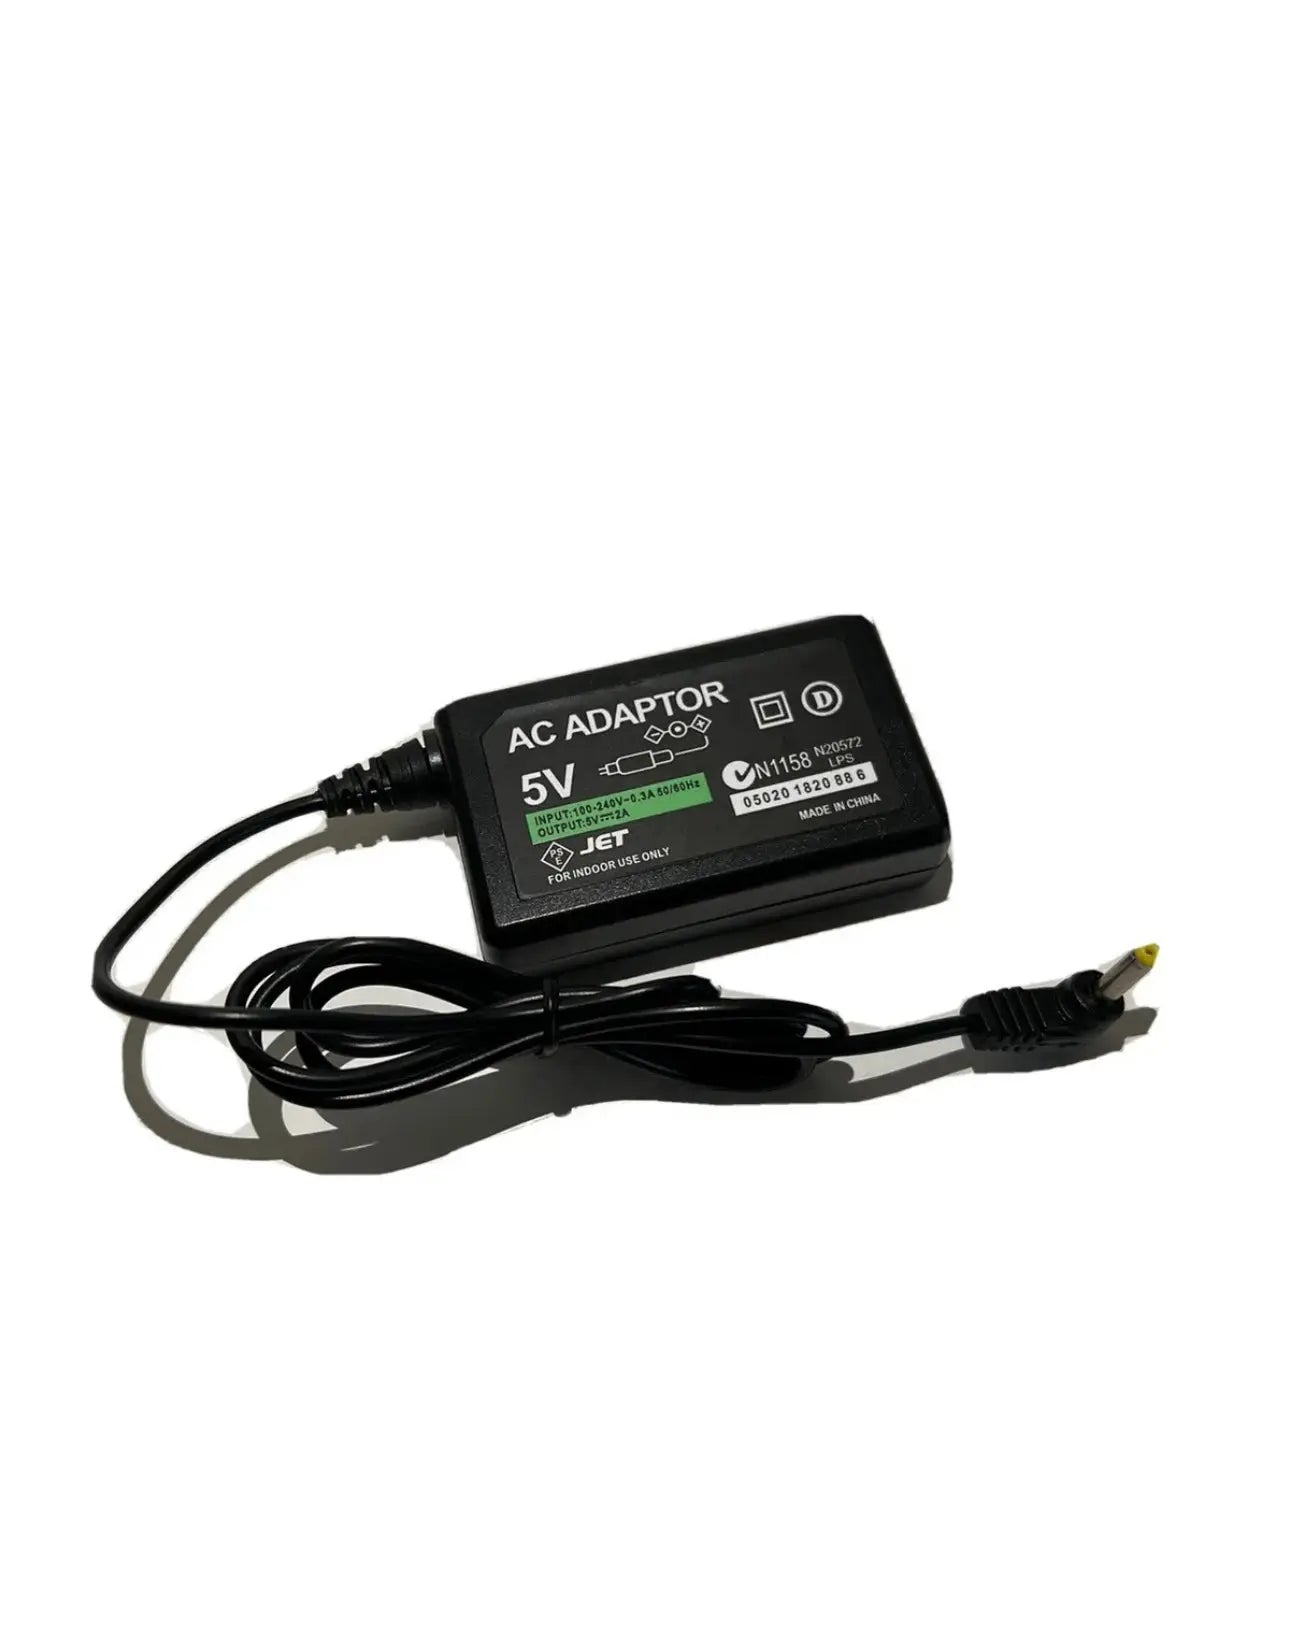 High-Quality PSP Power Supply AC Adapter with Power Lead Cable Plug - GameBlock